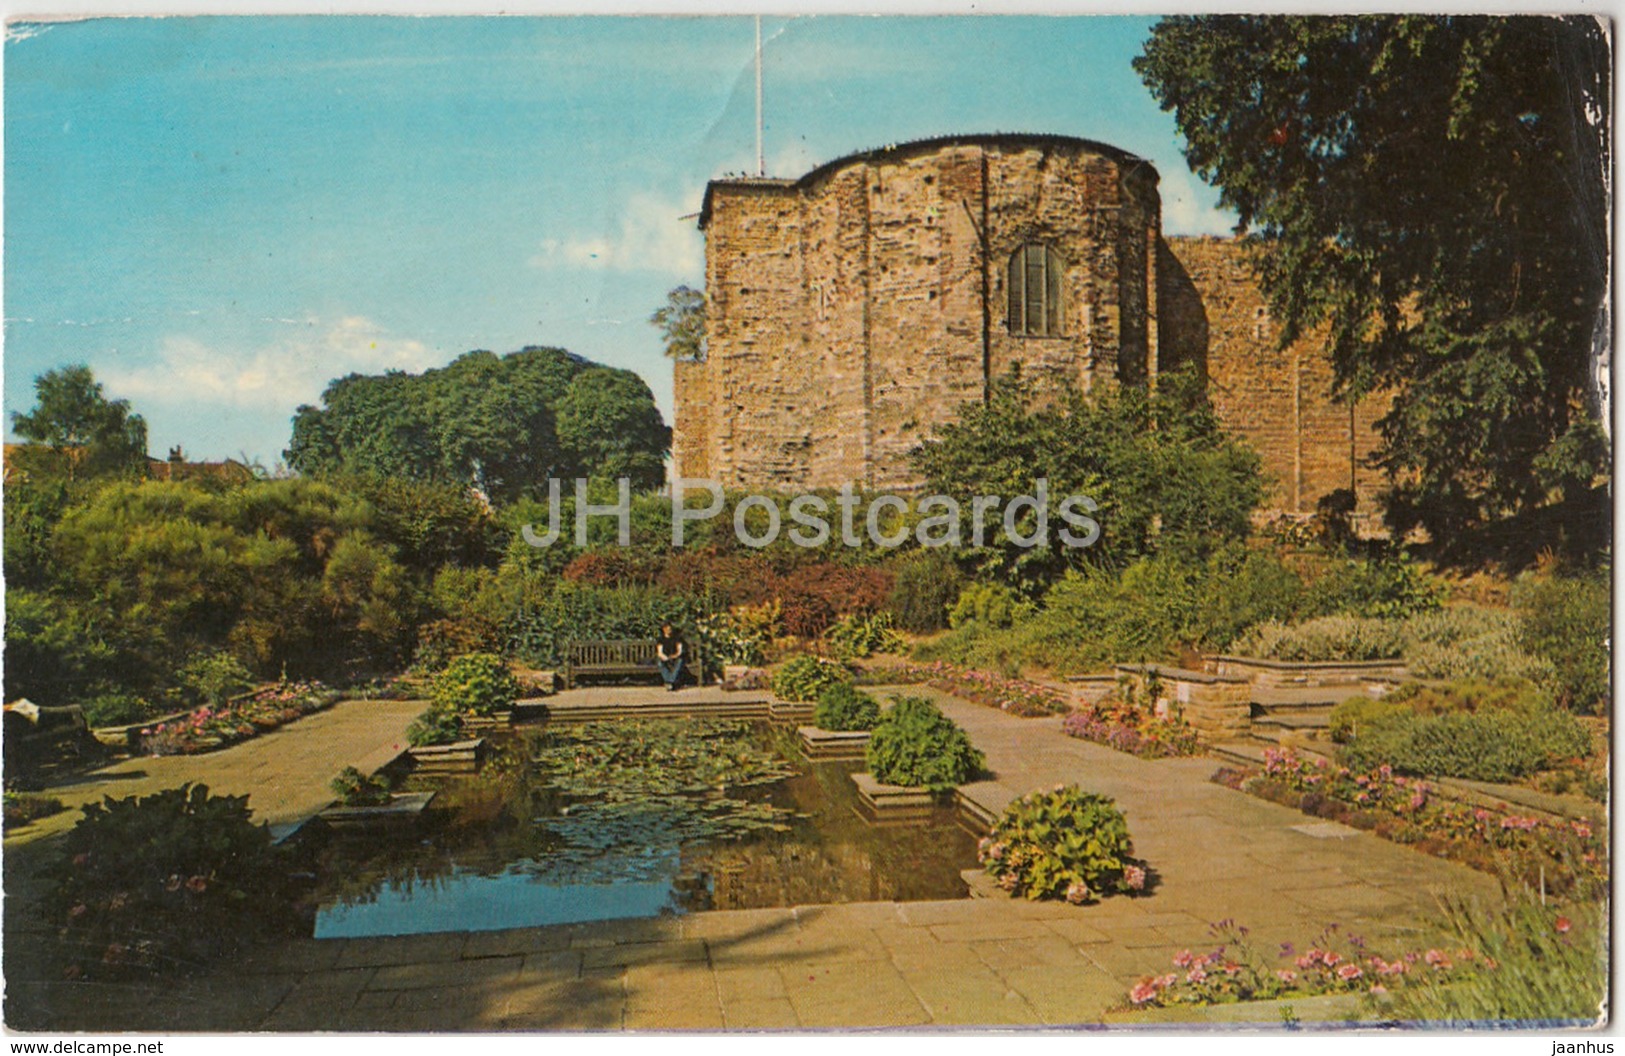 Colchester - Lily Pond And Castle - PT8470 - 1973 - United Kingdom - England - Used - Colchester